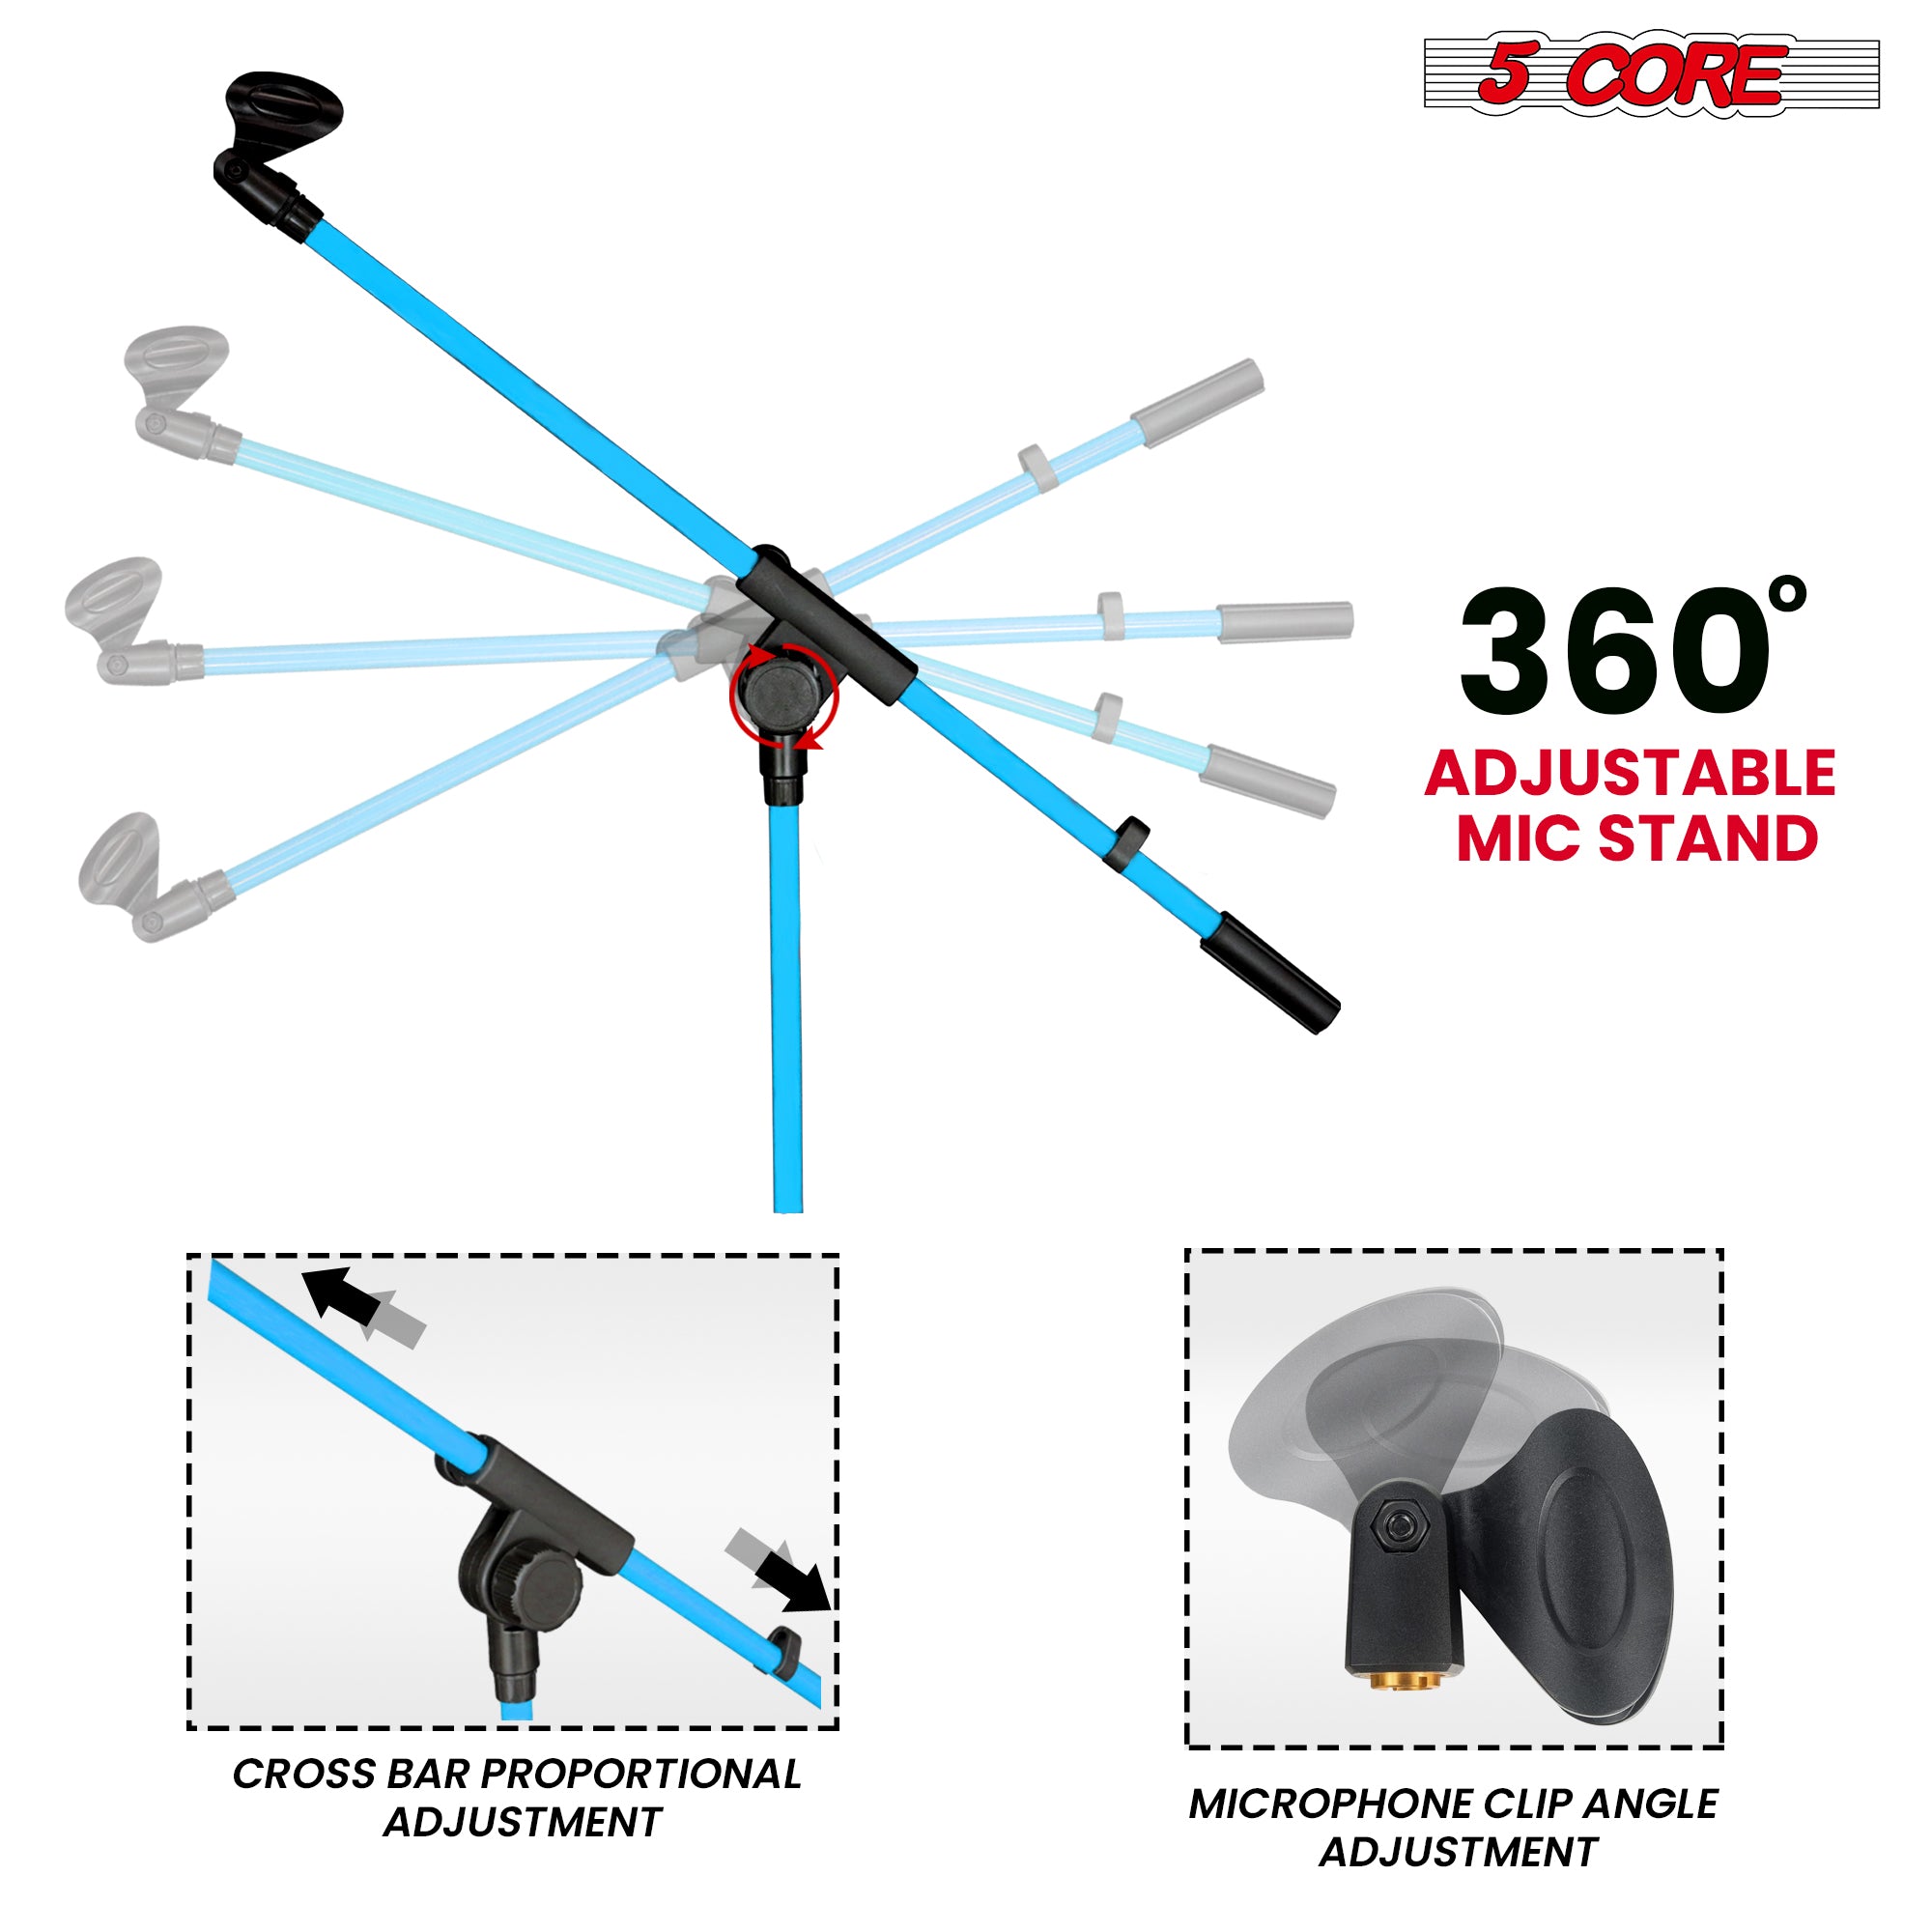 5 Core Mic Stand Sky Blue 1 Piece Collapsible Height Adjustable Up to 6ft Metal Microphone Tripod Stand w Boom Arm Para Microfono for Singing Karaoke Speech Stage Recording - MS 080 SKY BLU